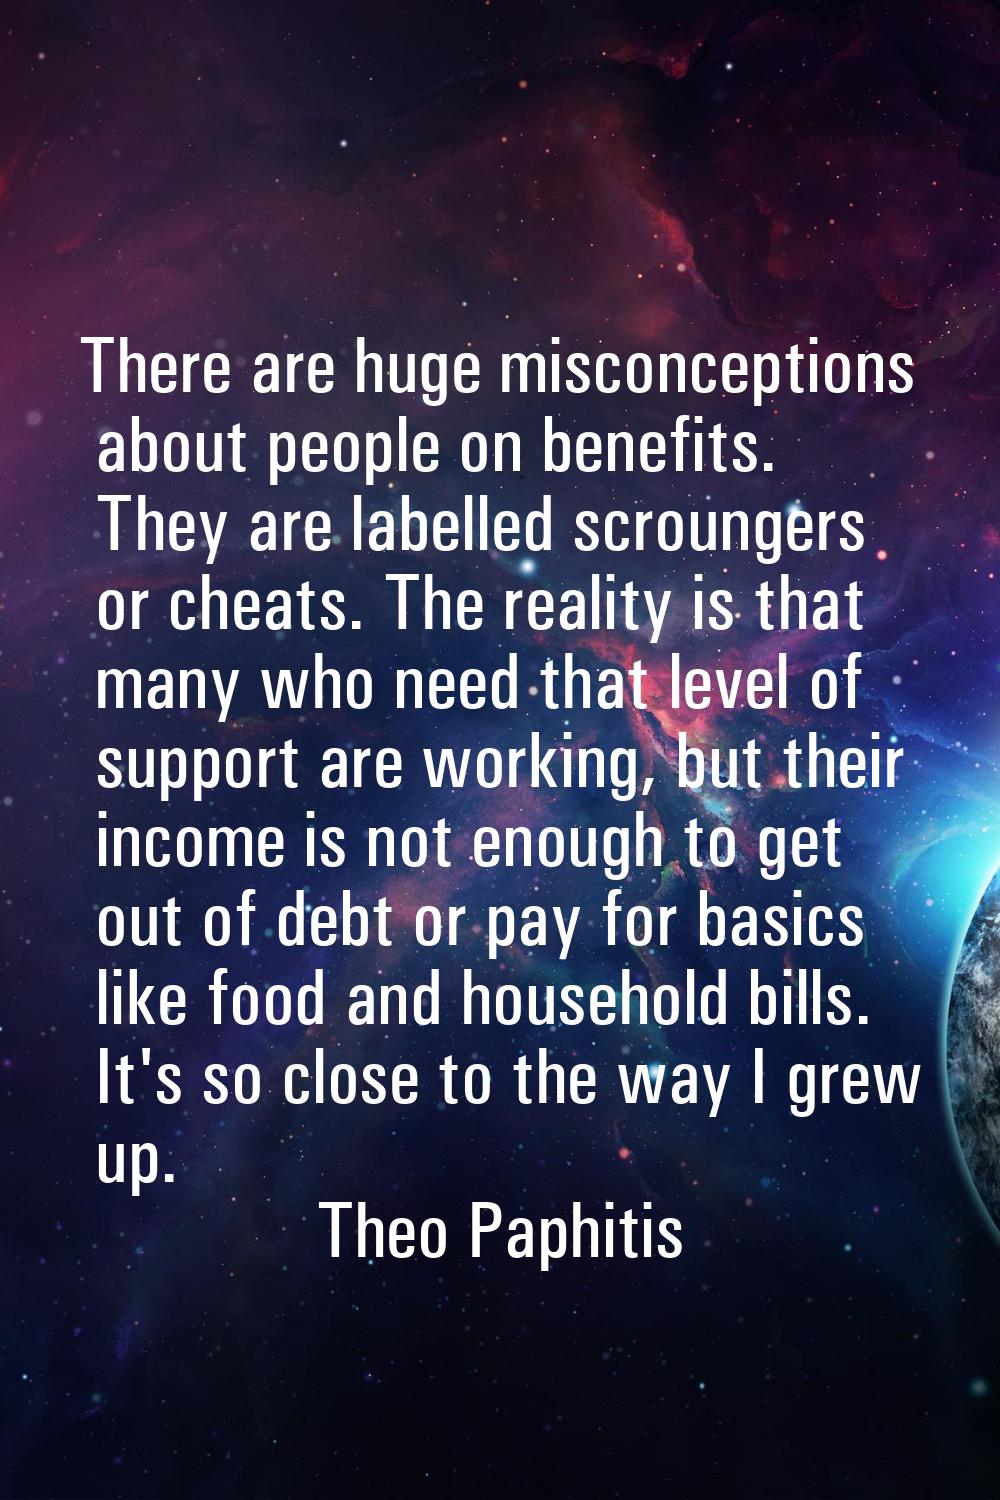 There are huge misconceptions about people on benefits. They are labelled scroungers or cheats. The